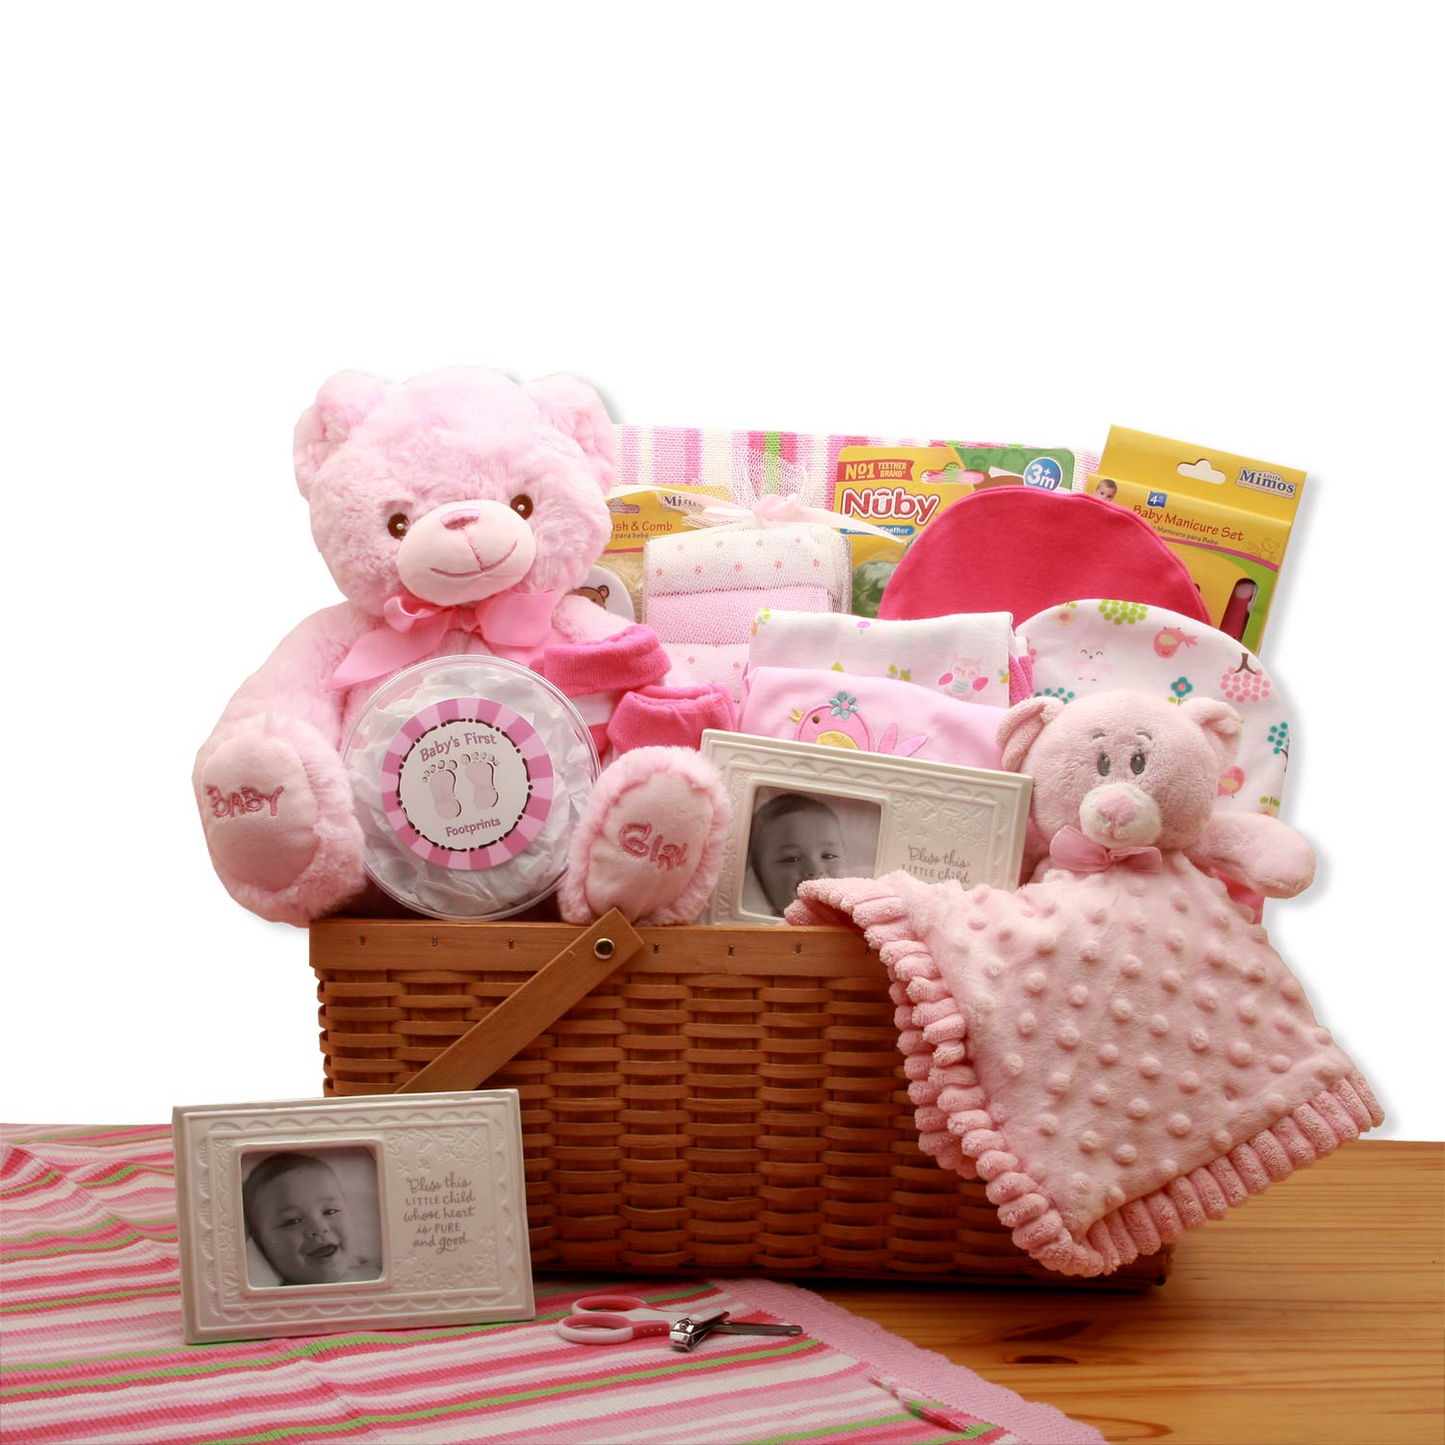 My First Teddy Bear New Baby Gift Basket - Pink - Perfect Baby Shower Gift